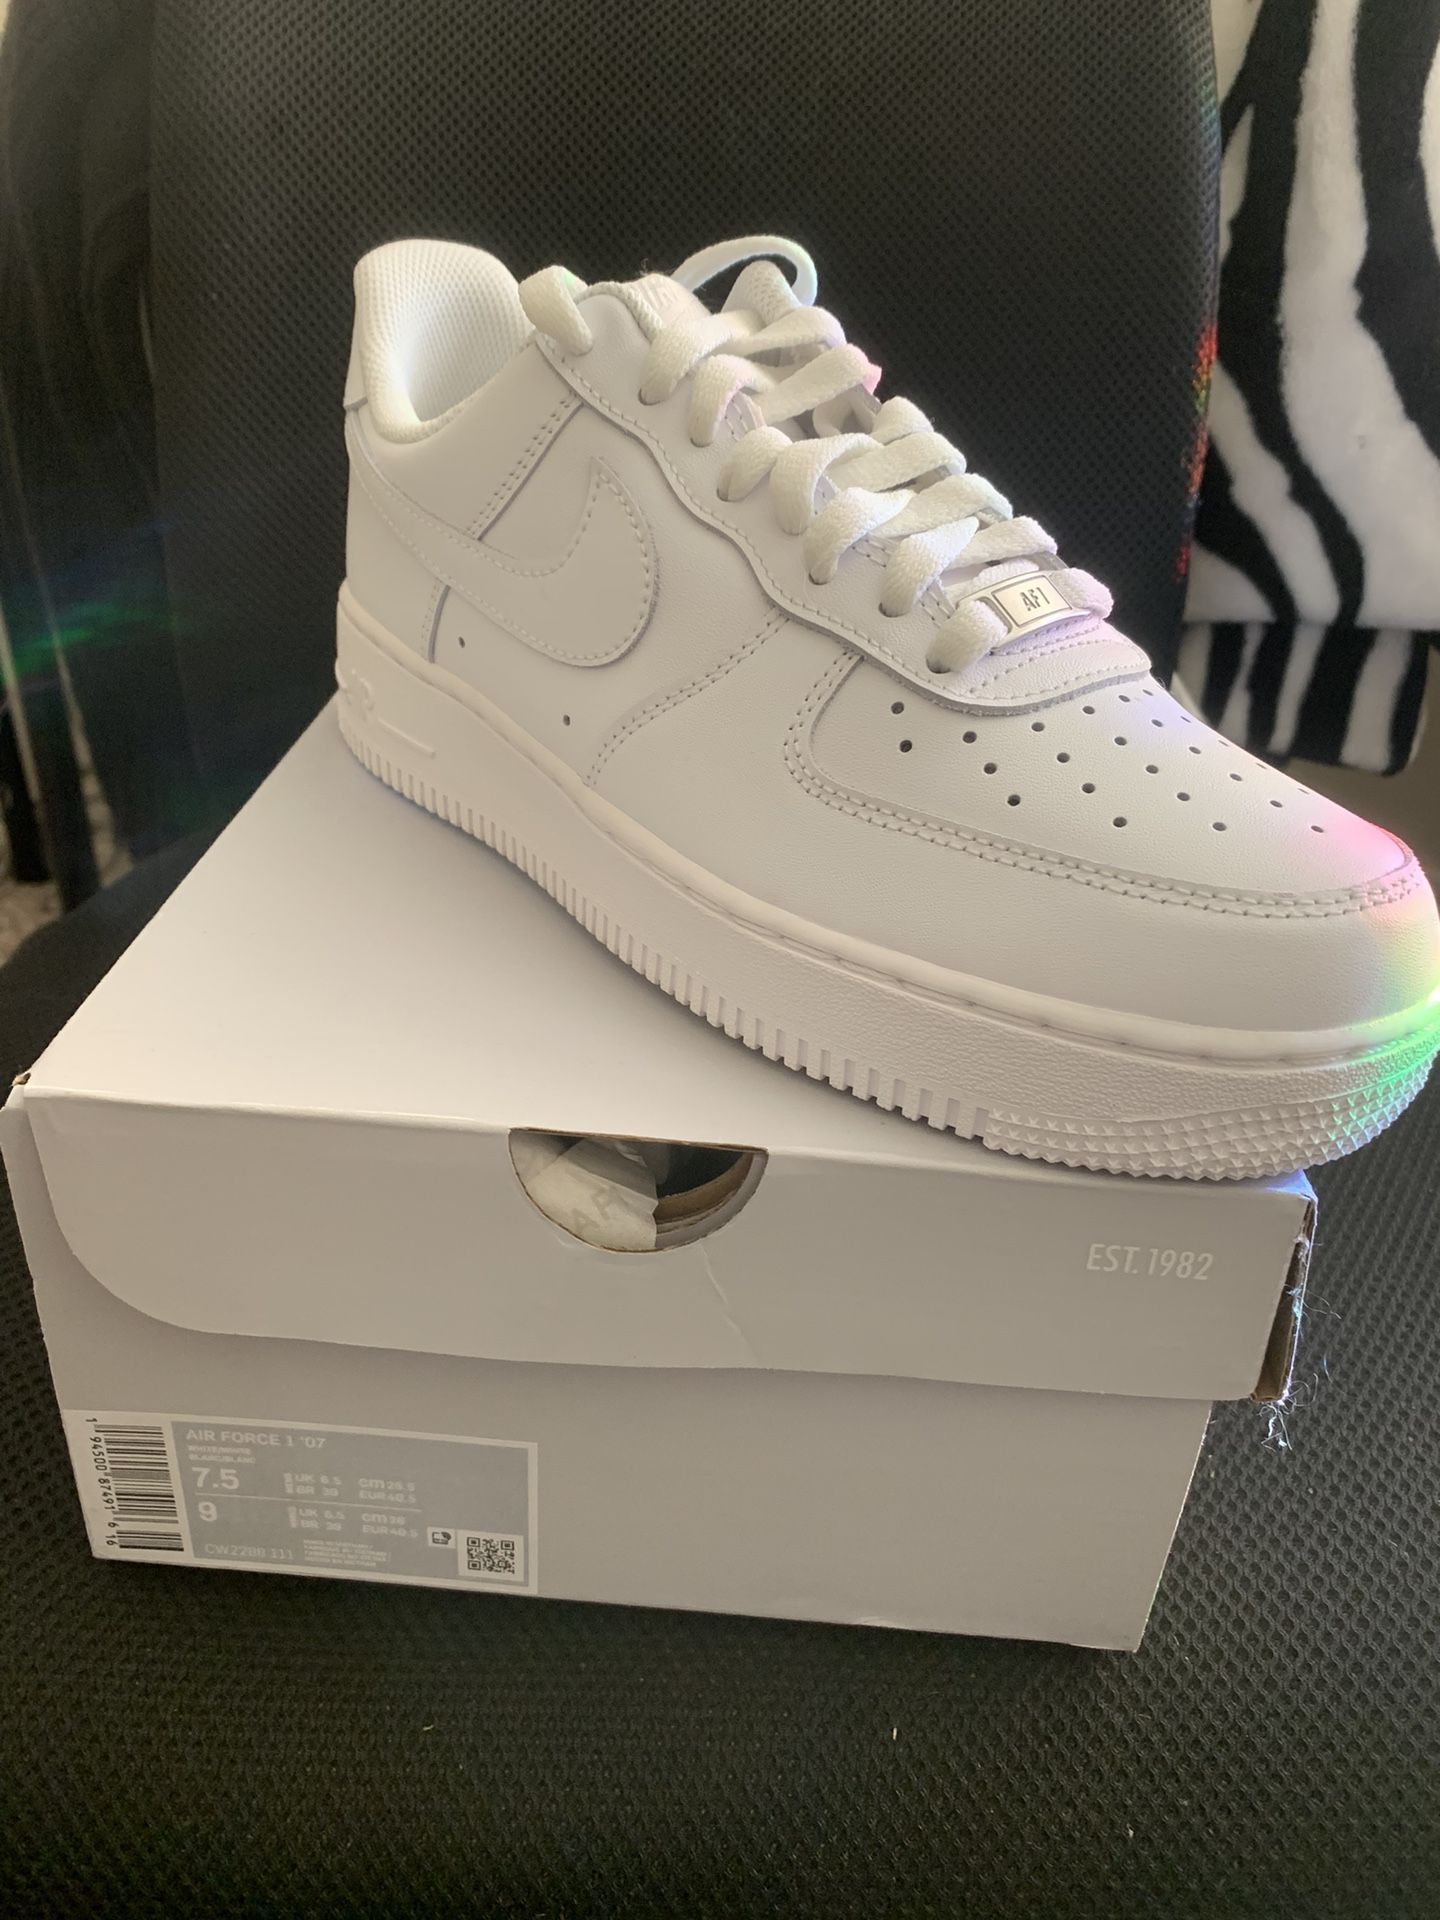 Nike Air Force 1 ‘07 Size 7.5 (New)